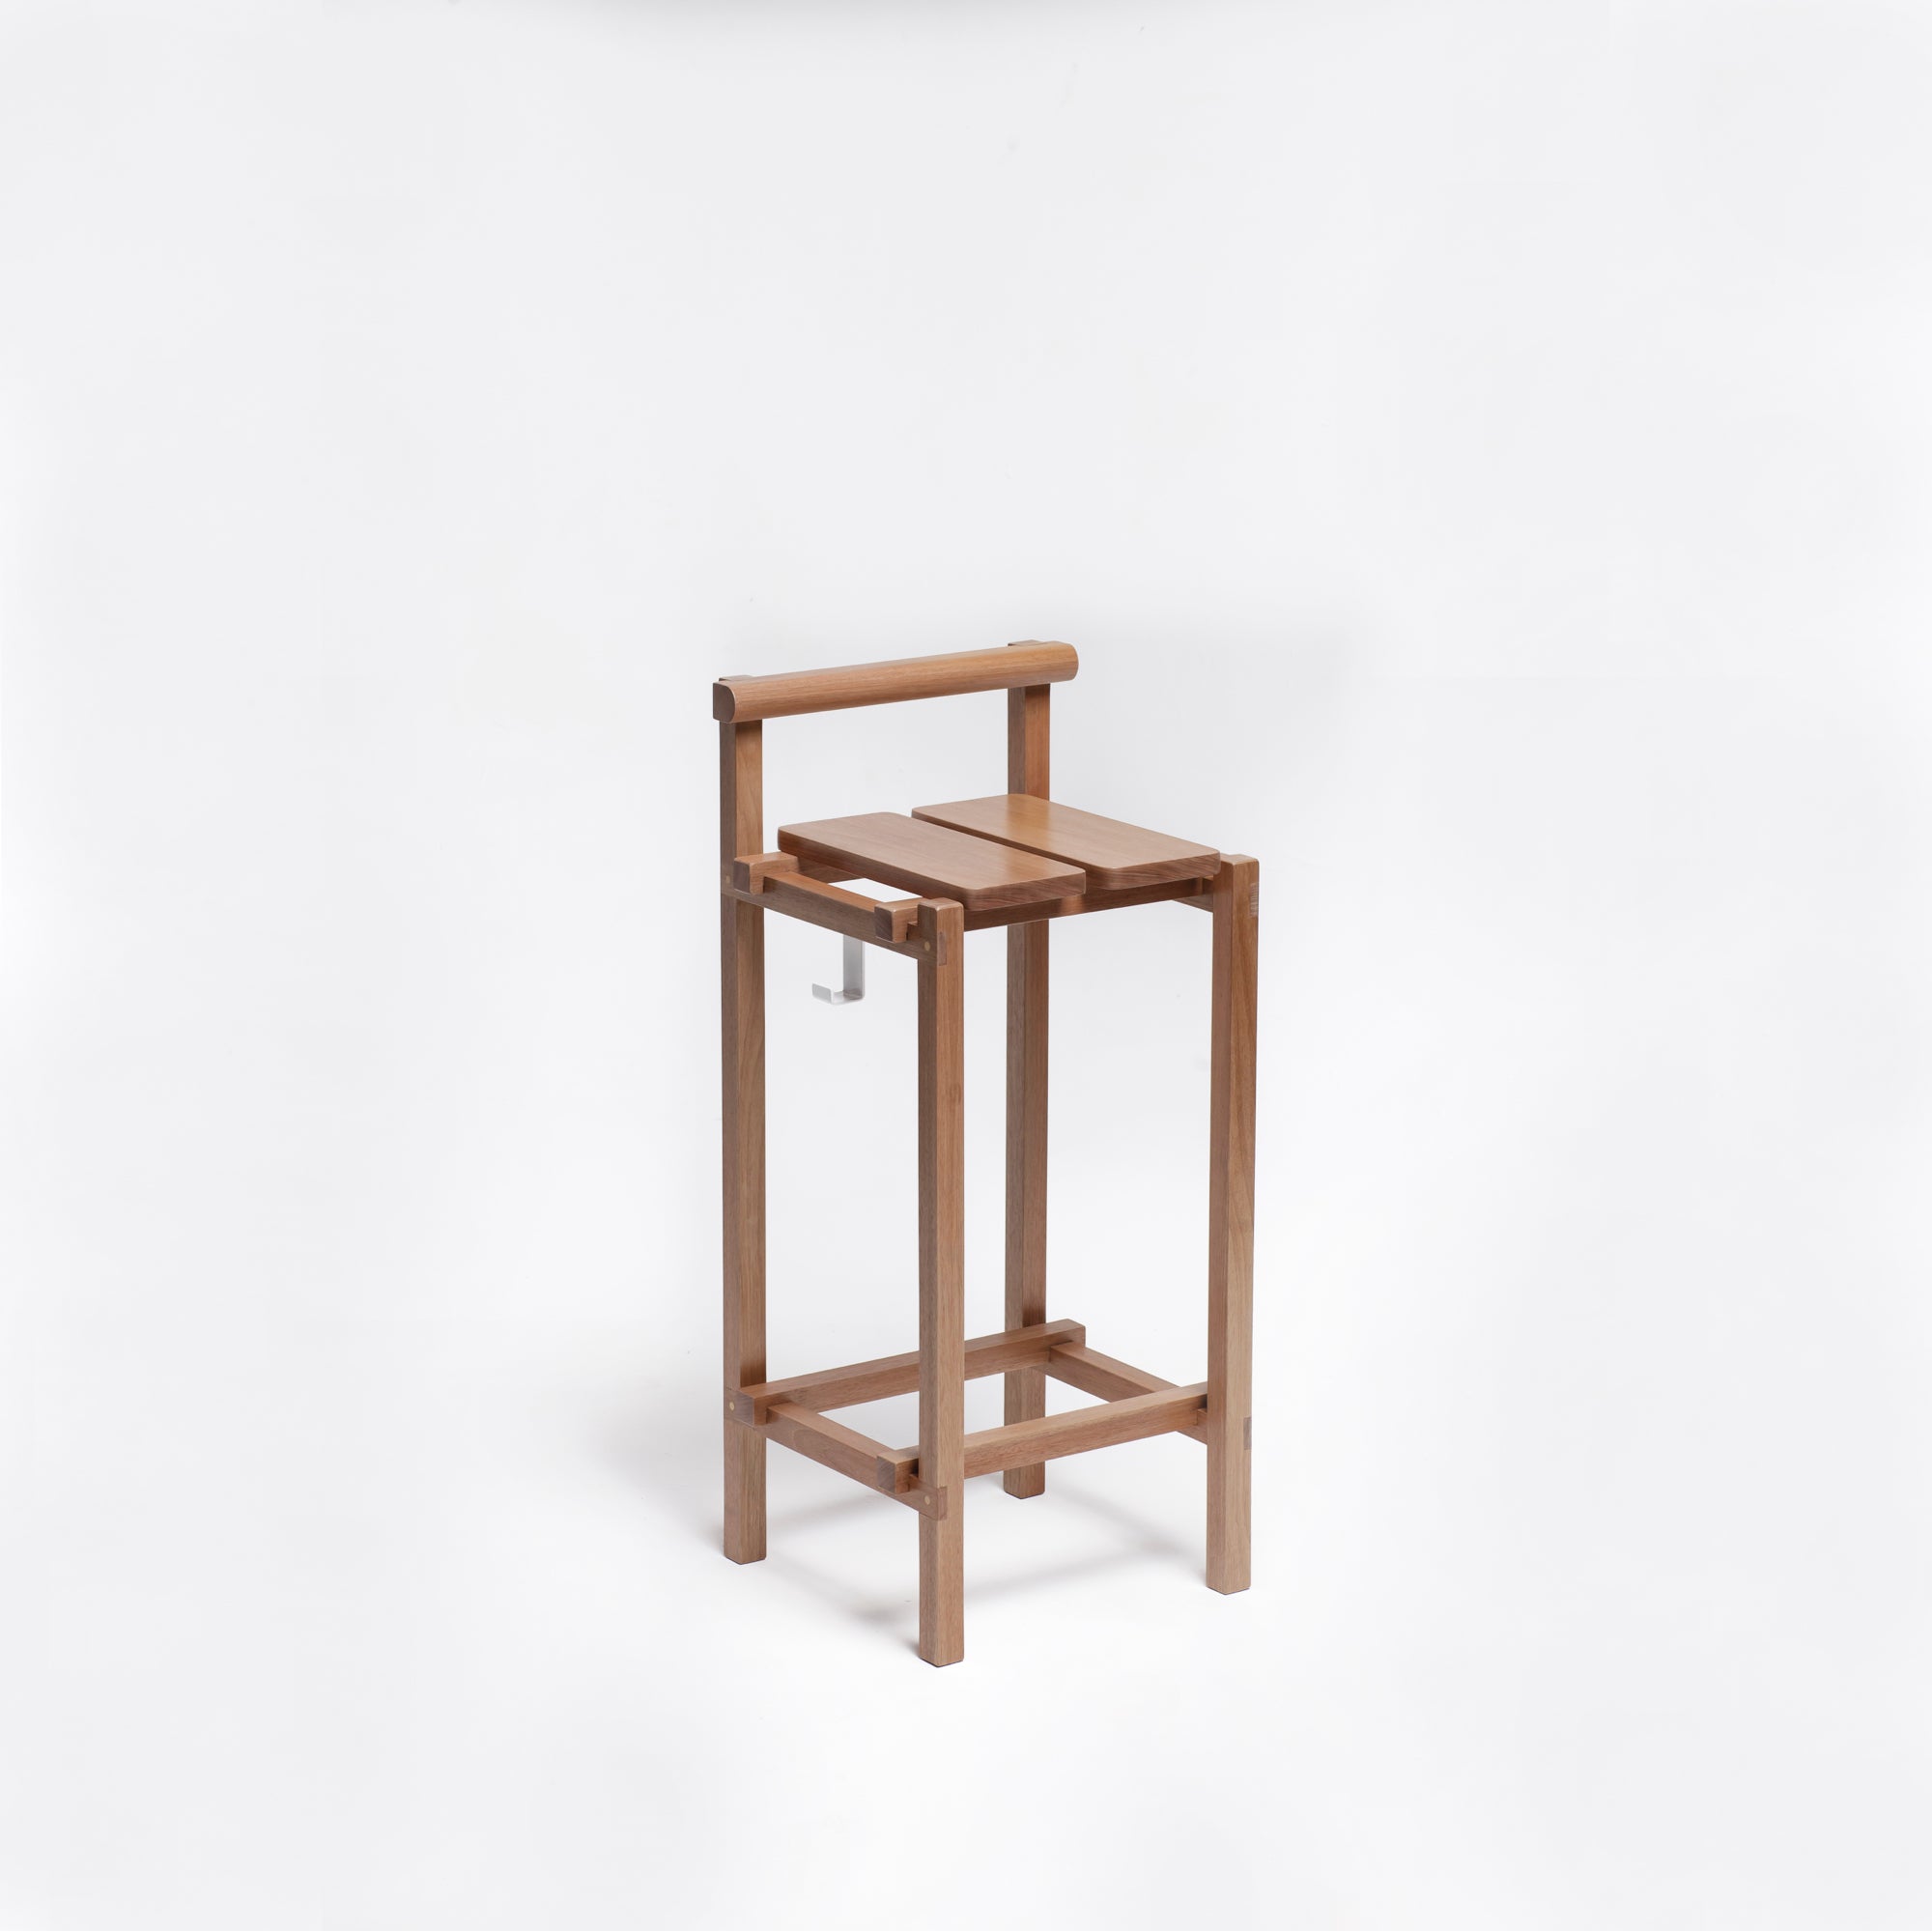 Set of 2 M Stools. Our M Stool is part of our M collection! Handcrafted in traditional woodworking techniques with certified brazilian wood. This stool is made with 